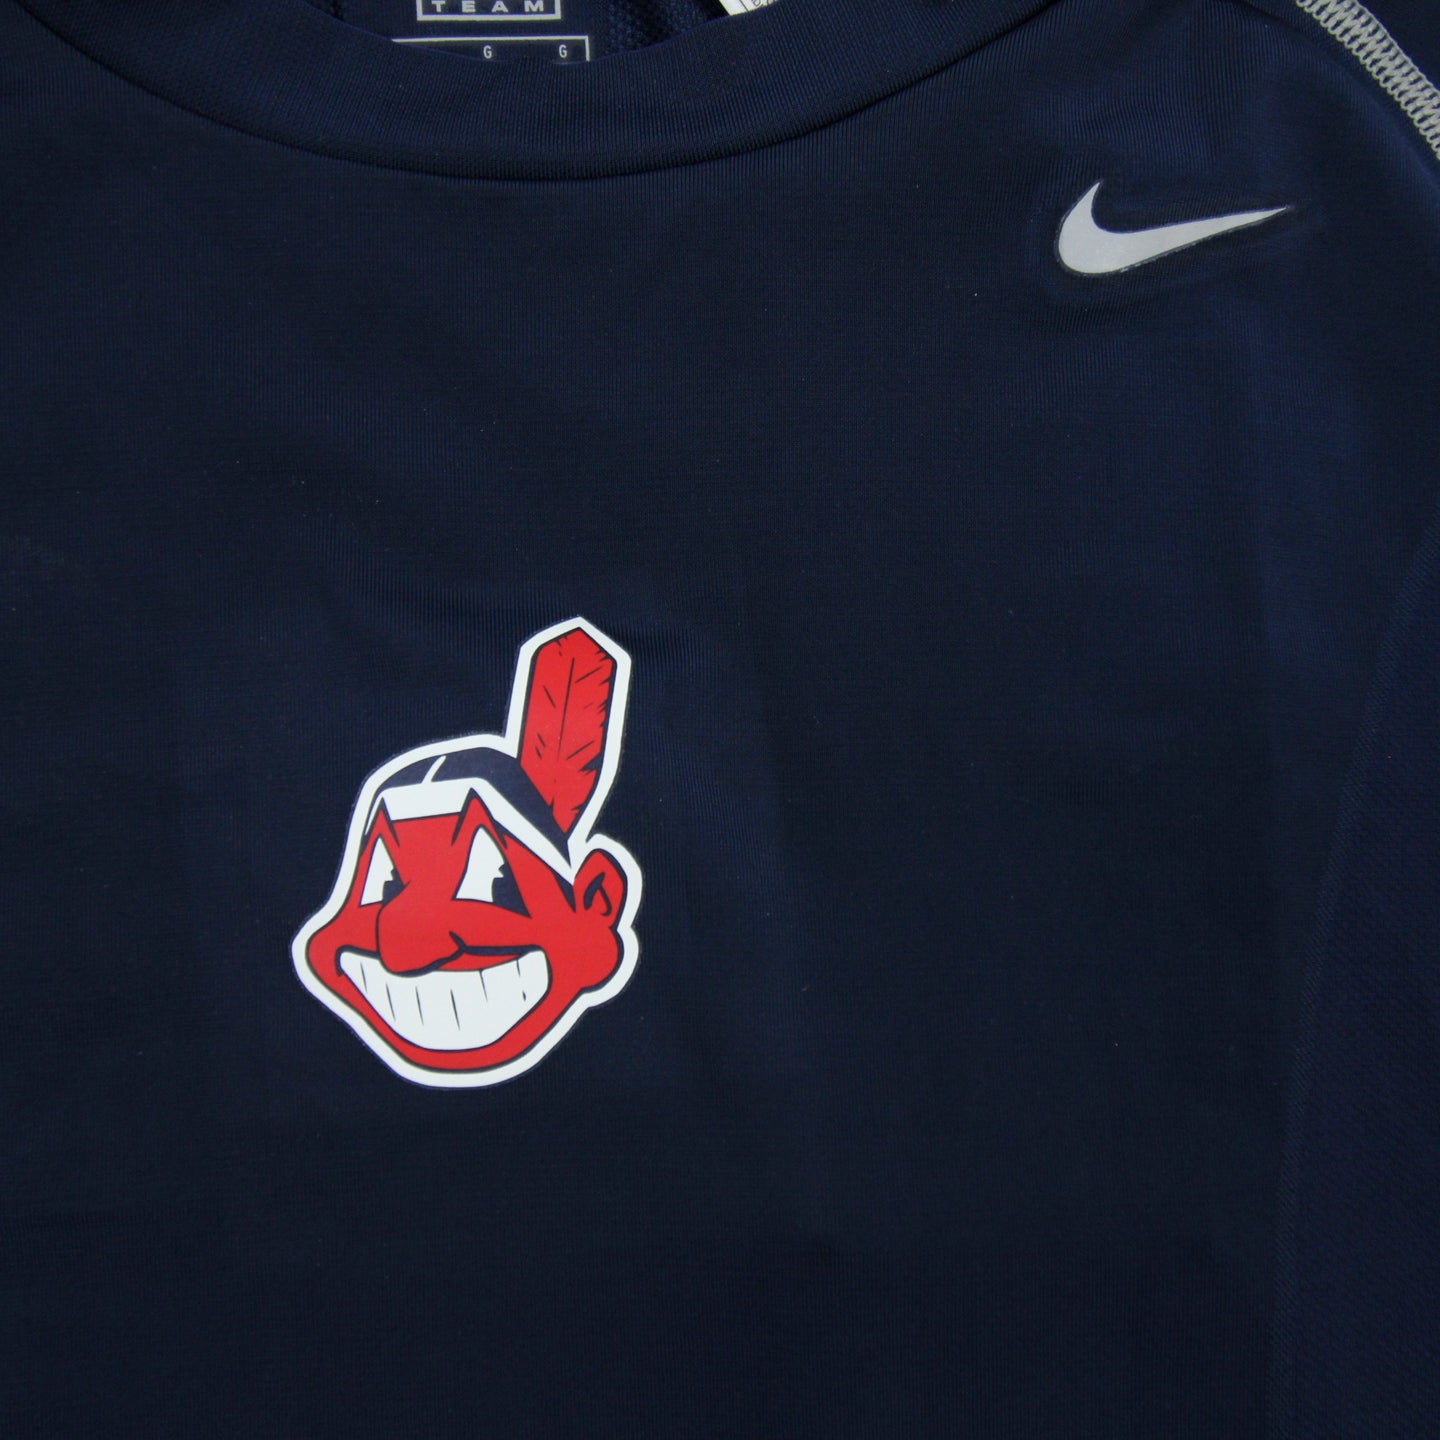 MLB Cleveland Indians Nike Dri-Fit T-shirt - Chief Wahoo - Youth L